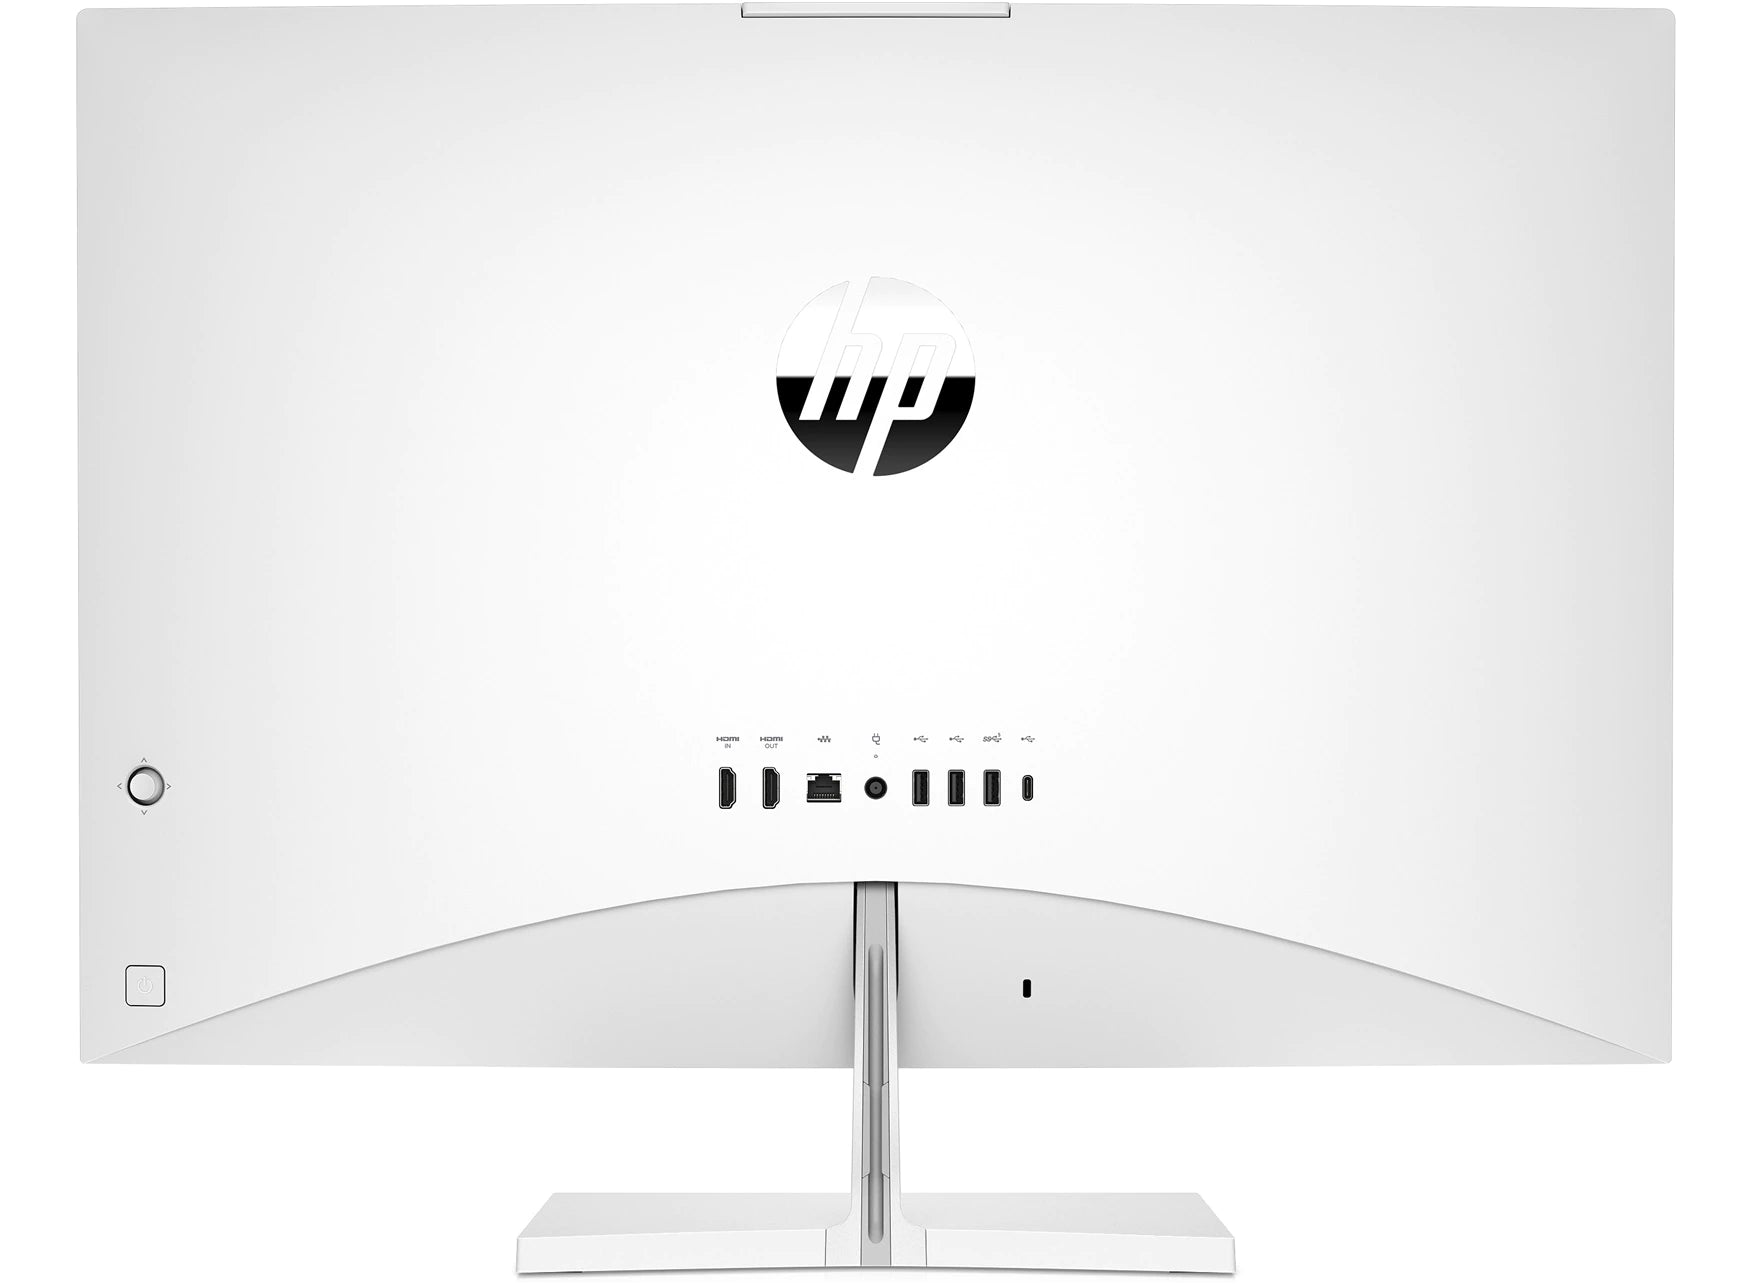 HP Pavilion 27-ca1009 All-in-One PC